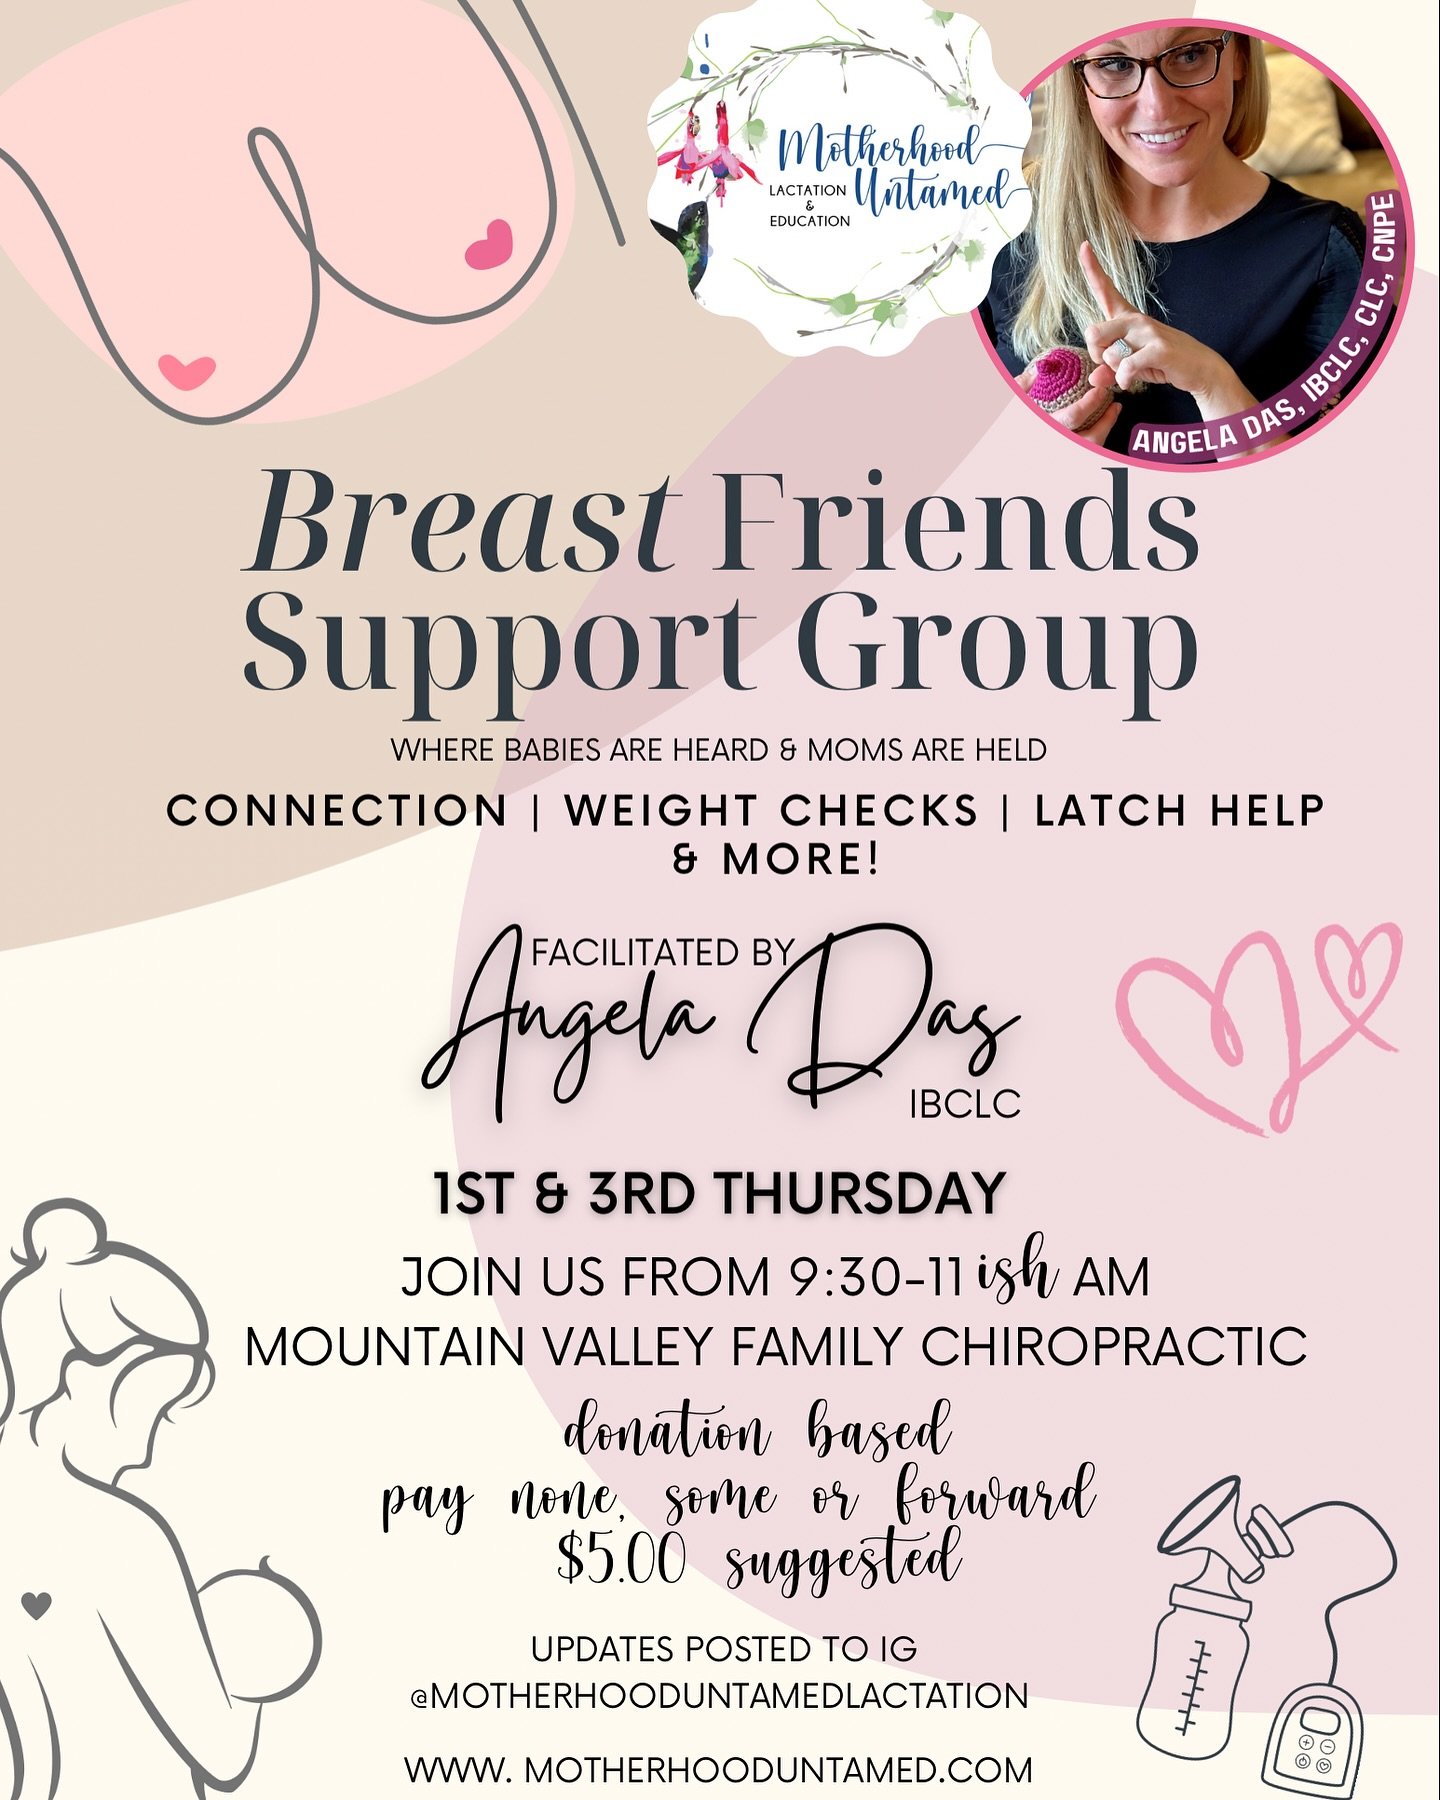 BREASTfriends group has MOVED! Starting 5/16 we are now at @maxlivingofficial Mountain Valley Family Chiropractic - we are STILL: 

📅 1st and 3rd Thursday of the Month
⏰ 9:30am - 11:00am 
💰 WE ARE A DONATION BASED GROUP 

We support feeding your ba